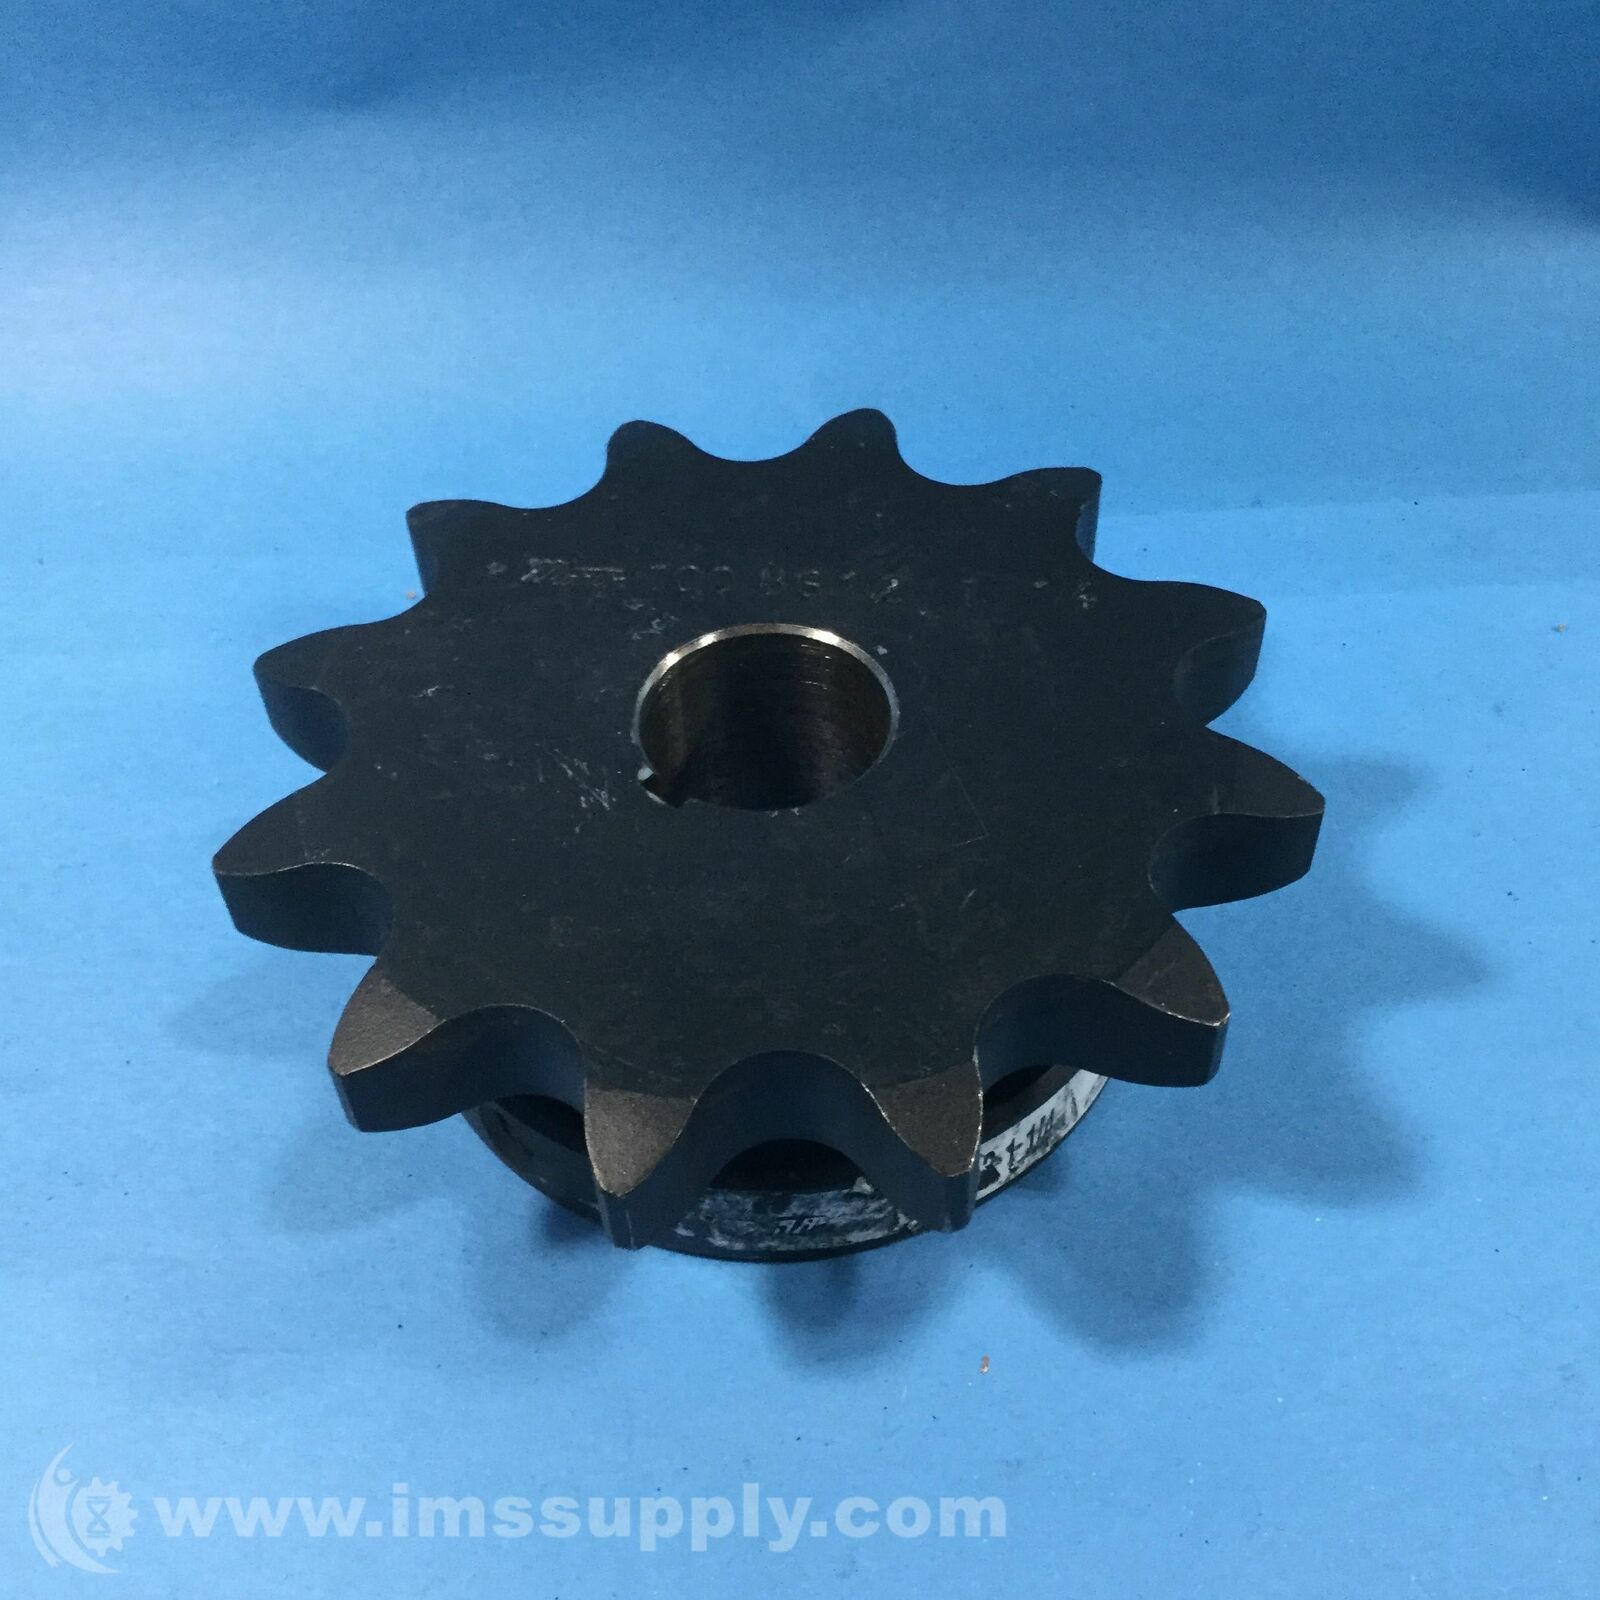 Sale price Martin Max 88% OFF 100BS12 1 4 Bored to 100 Sprocket in 1-1 USIP Size